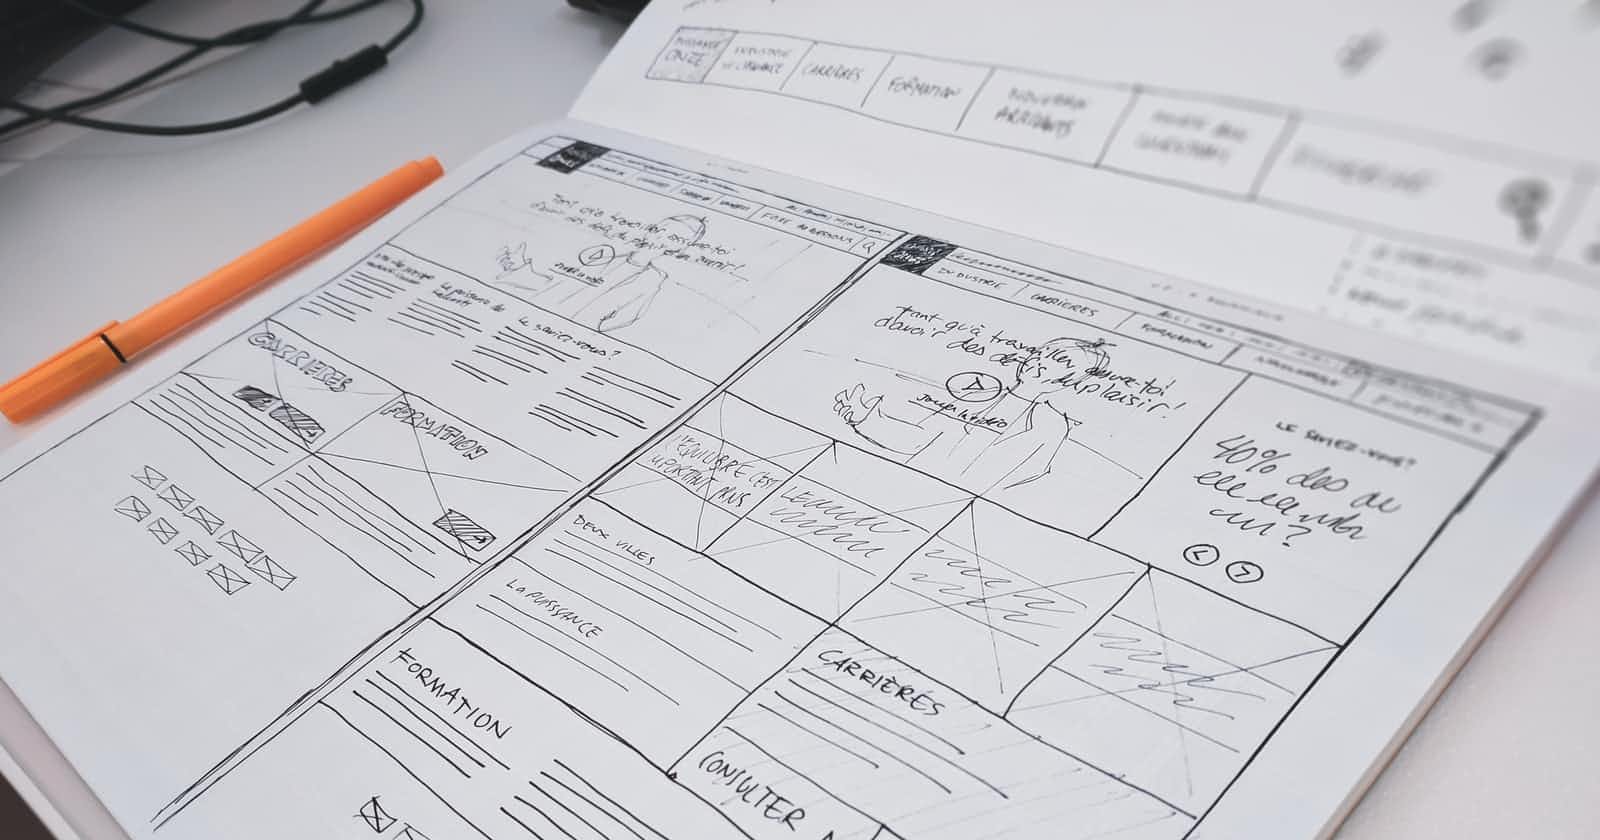 Wireframing is not a big deal (The non-designer approach)